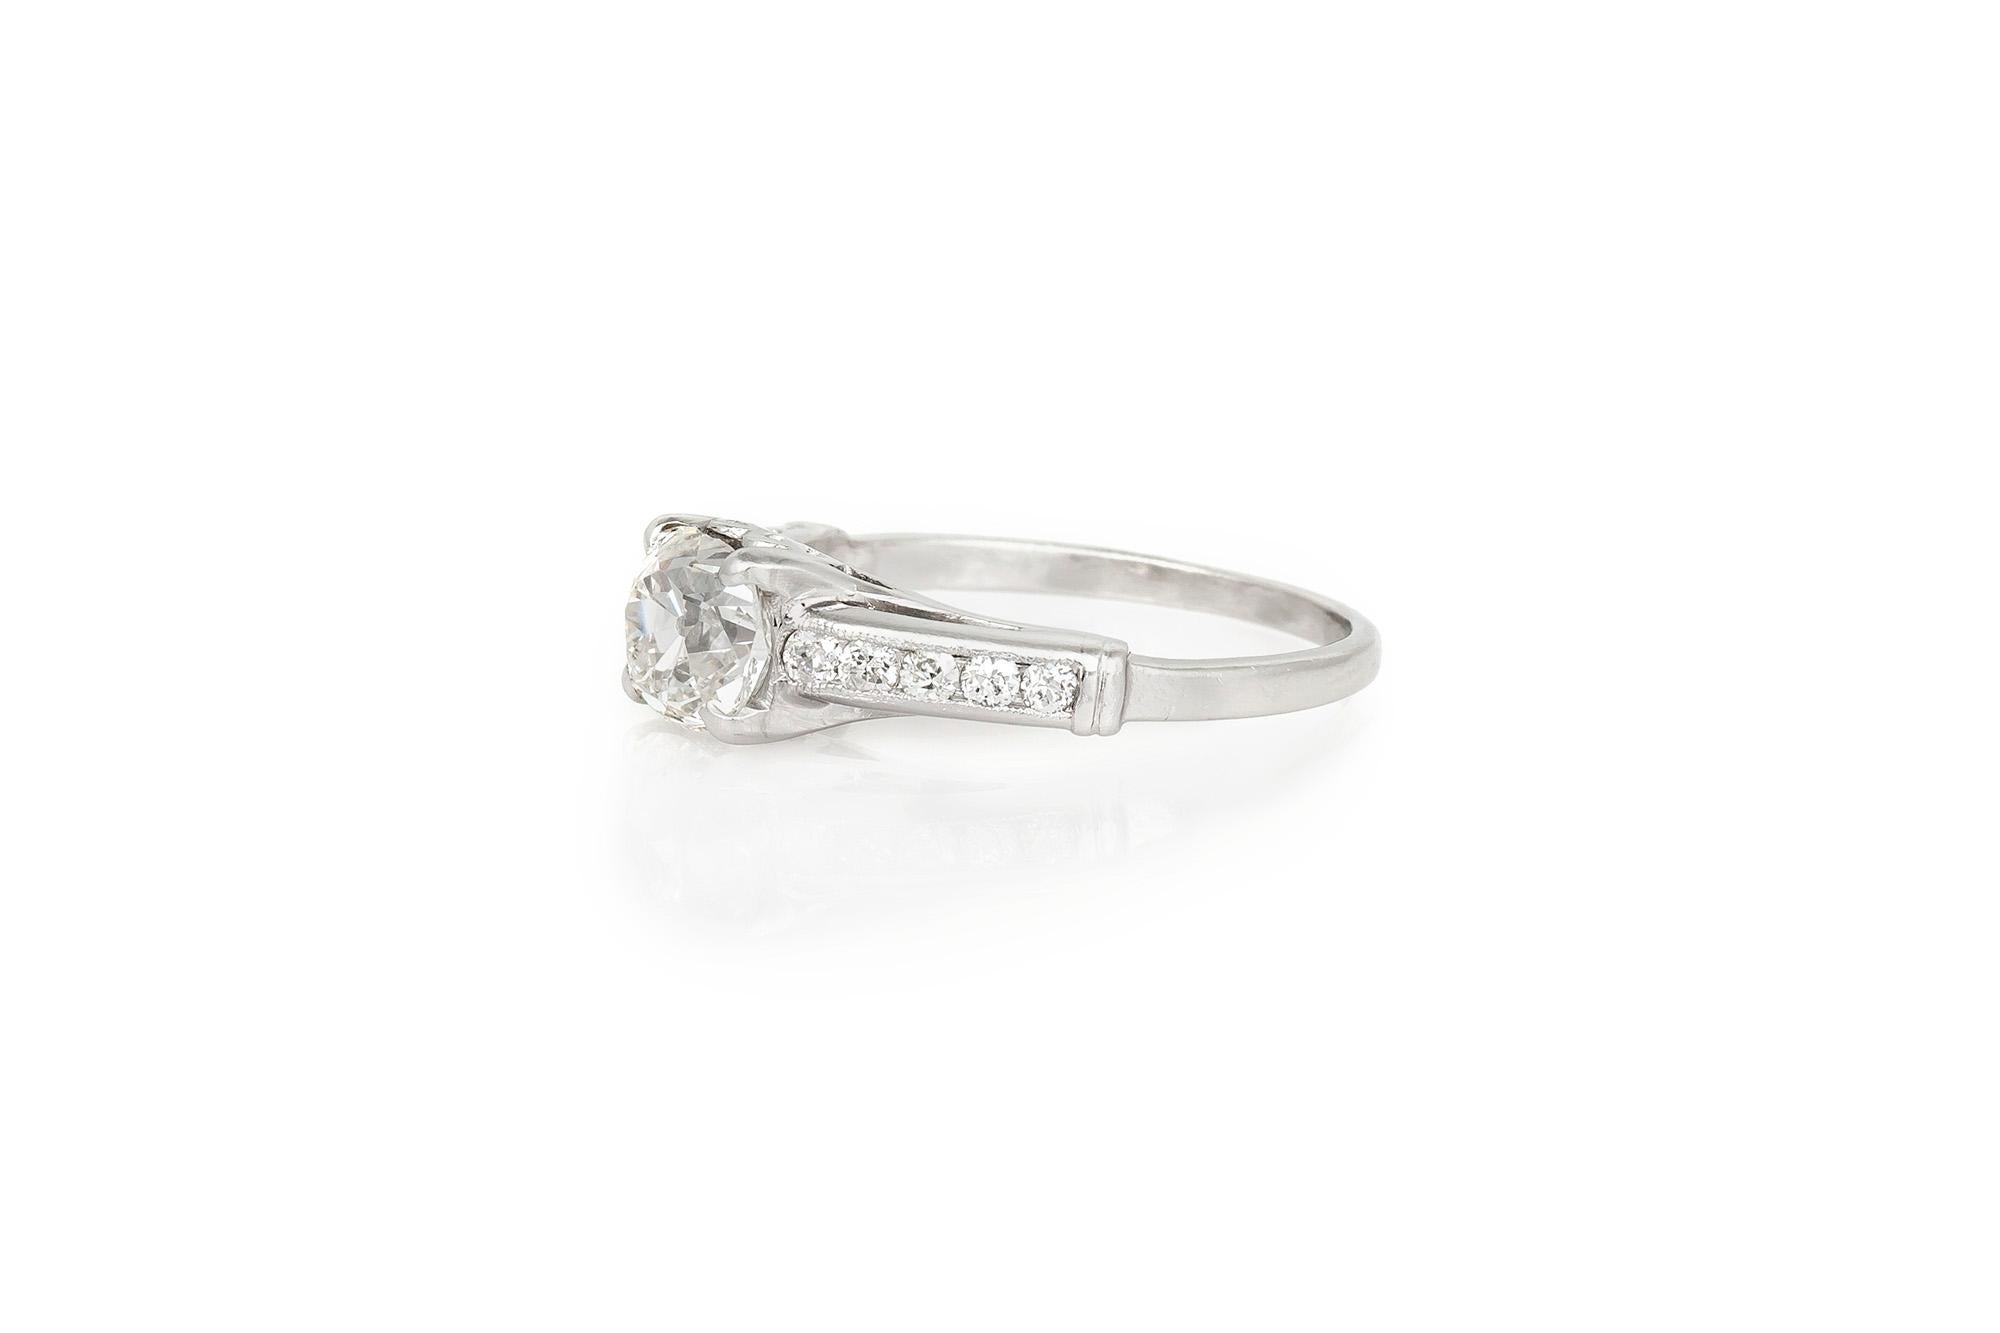 The beautiful ring is finely crafted in platinum with an Old Cushion cut center diamond weighing approximately a total of 1.47 carats, and side diamonds weighing approximately a total of 0.30 carats.
Color J
Clarity VS
Circa 1930
